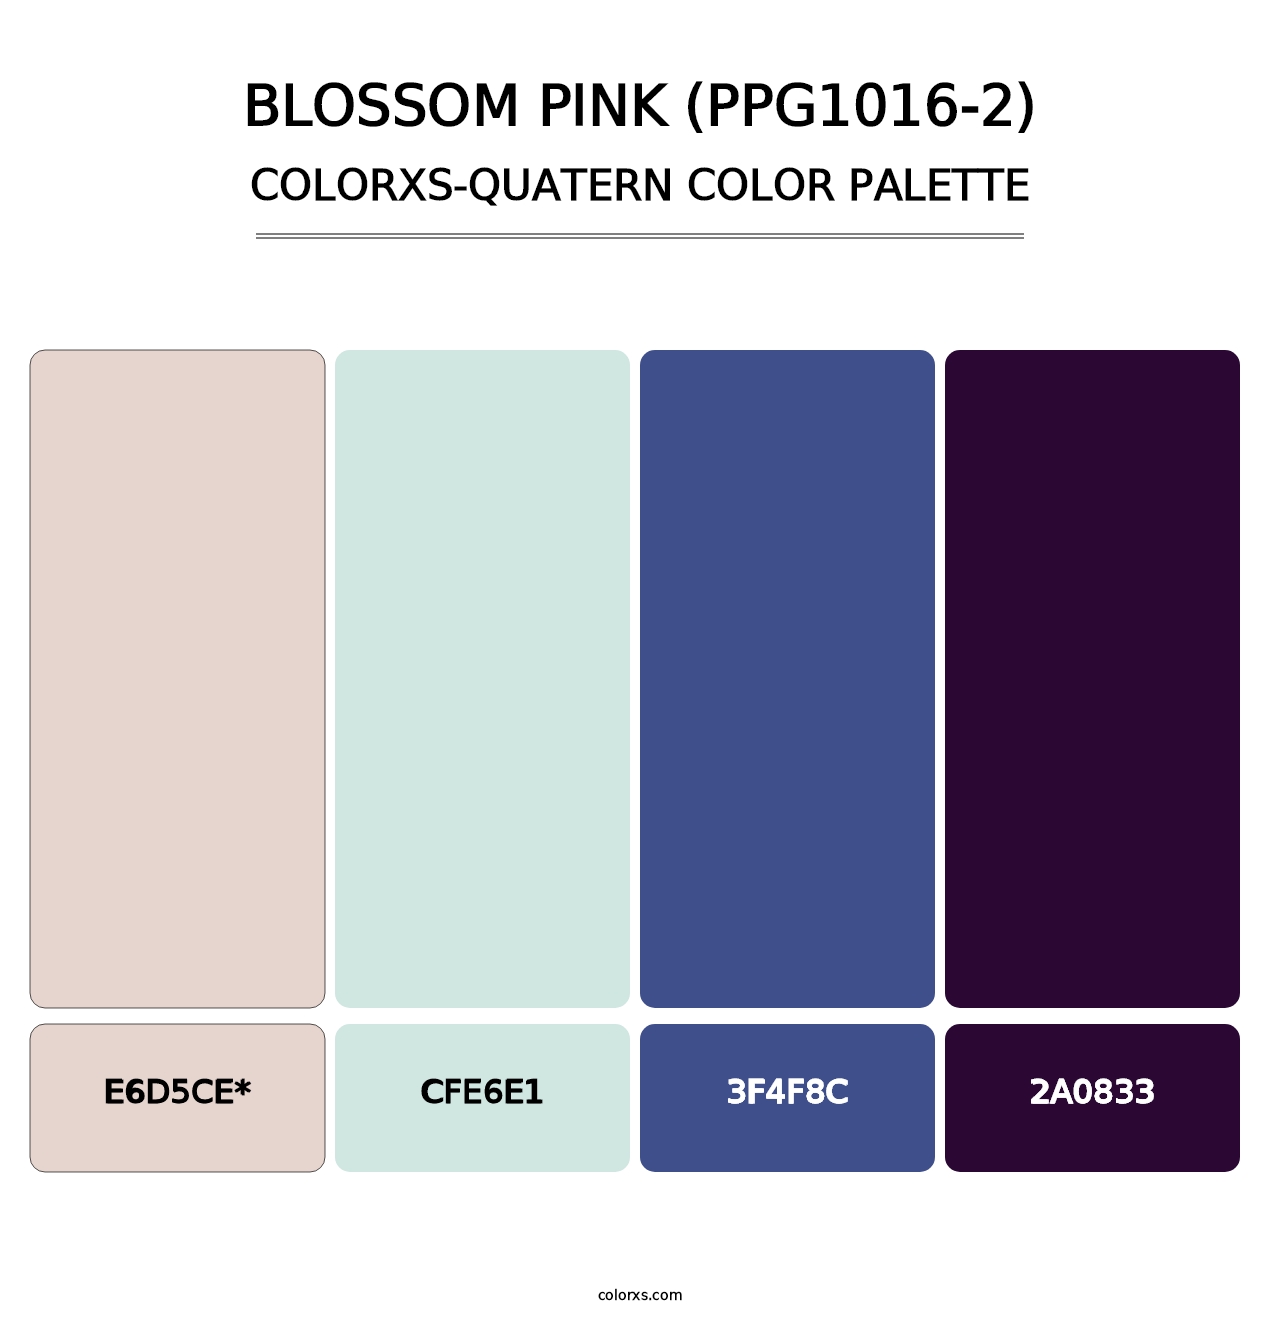 Blossom Pink (PPG1016-2) - Colorxs Quatern Palette